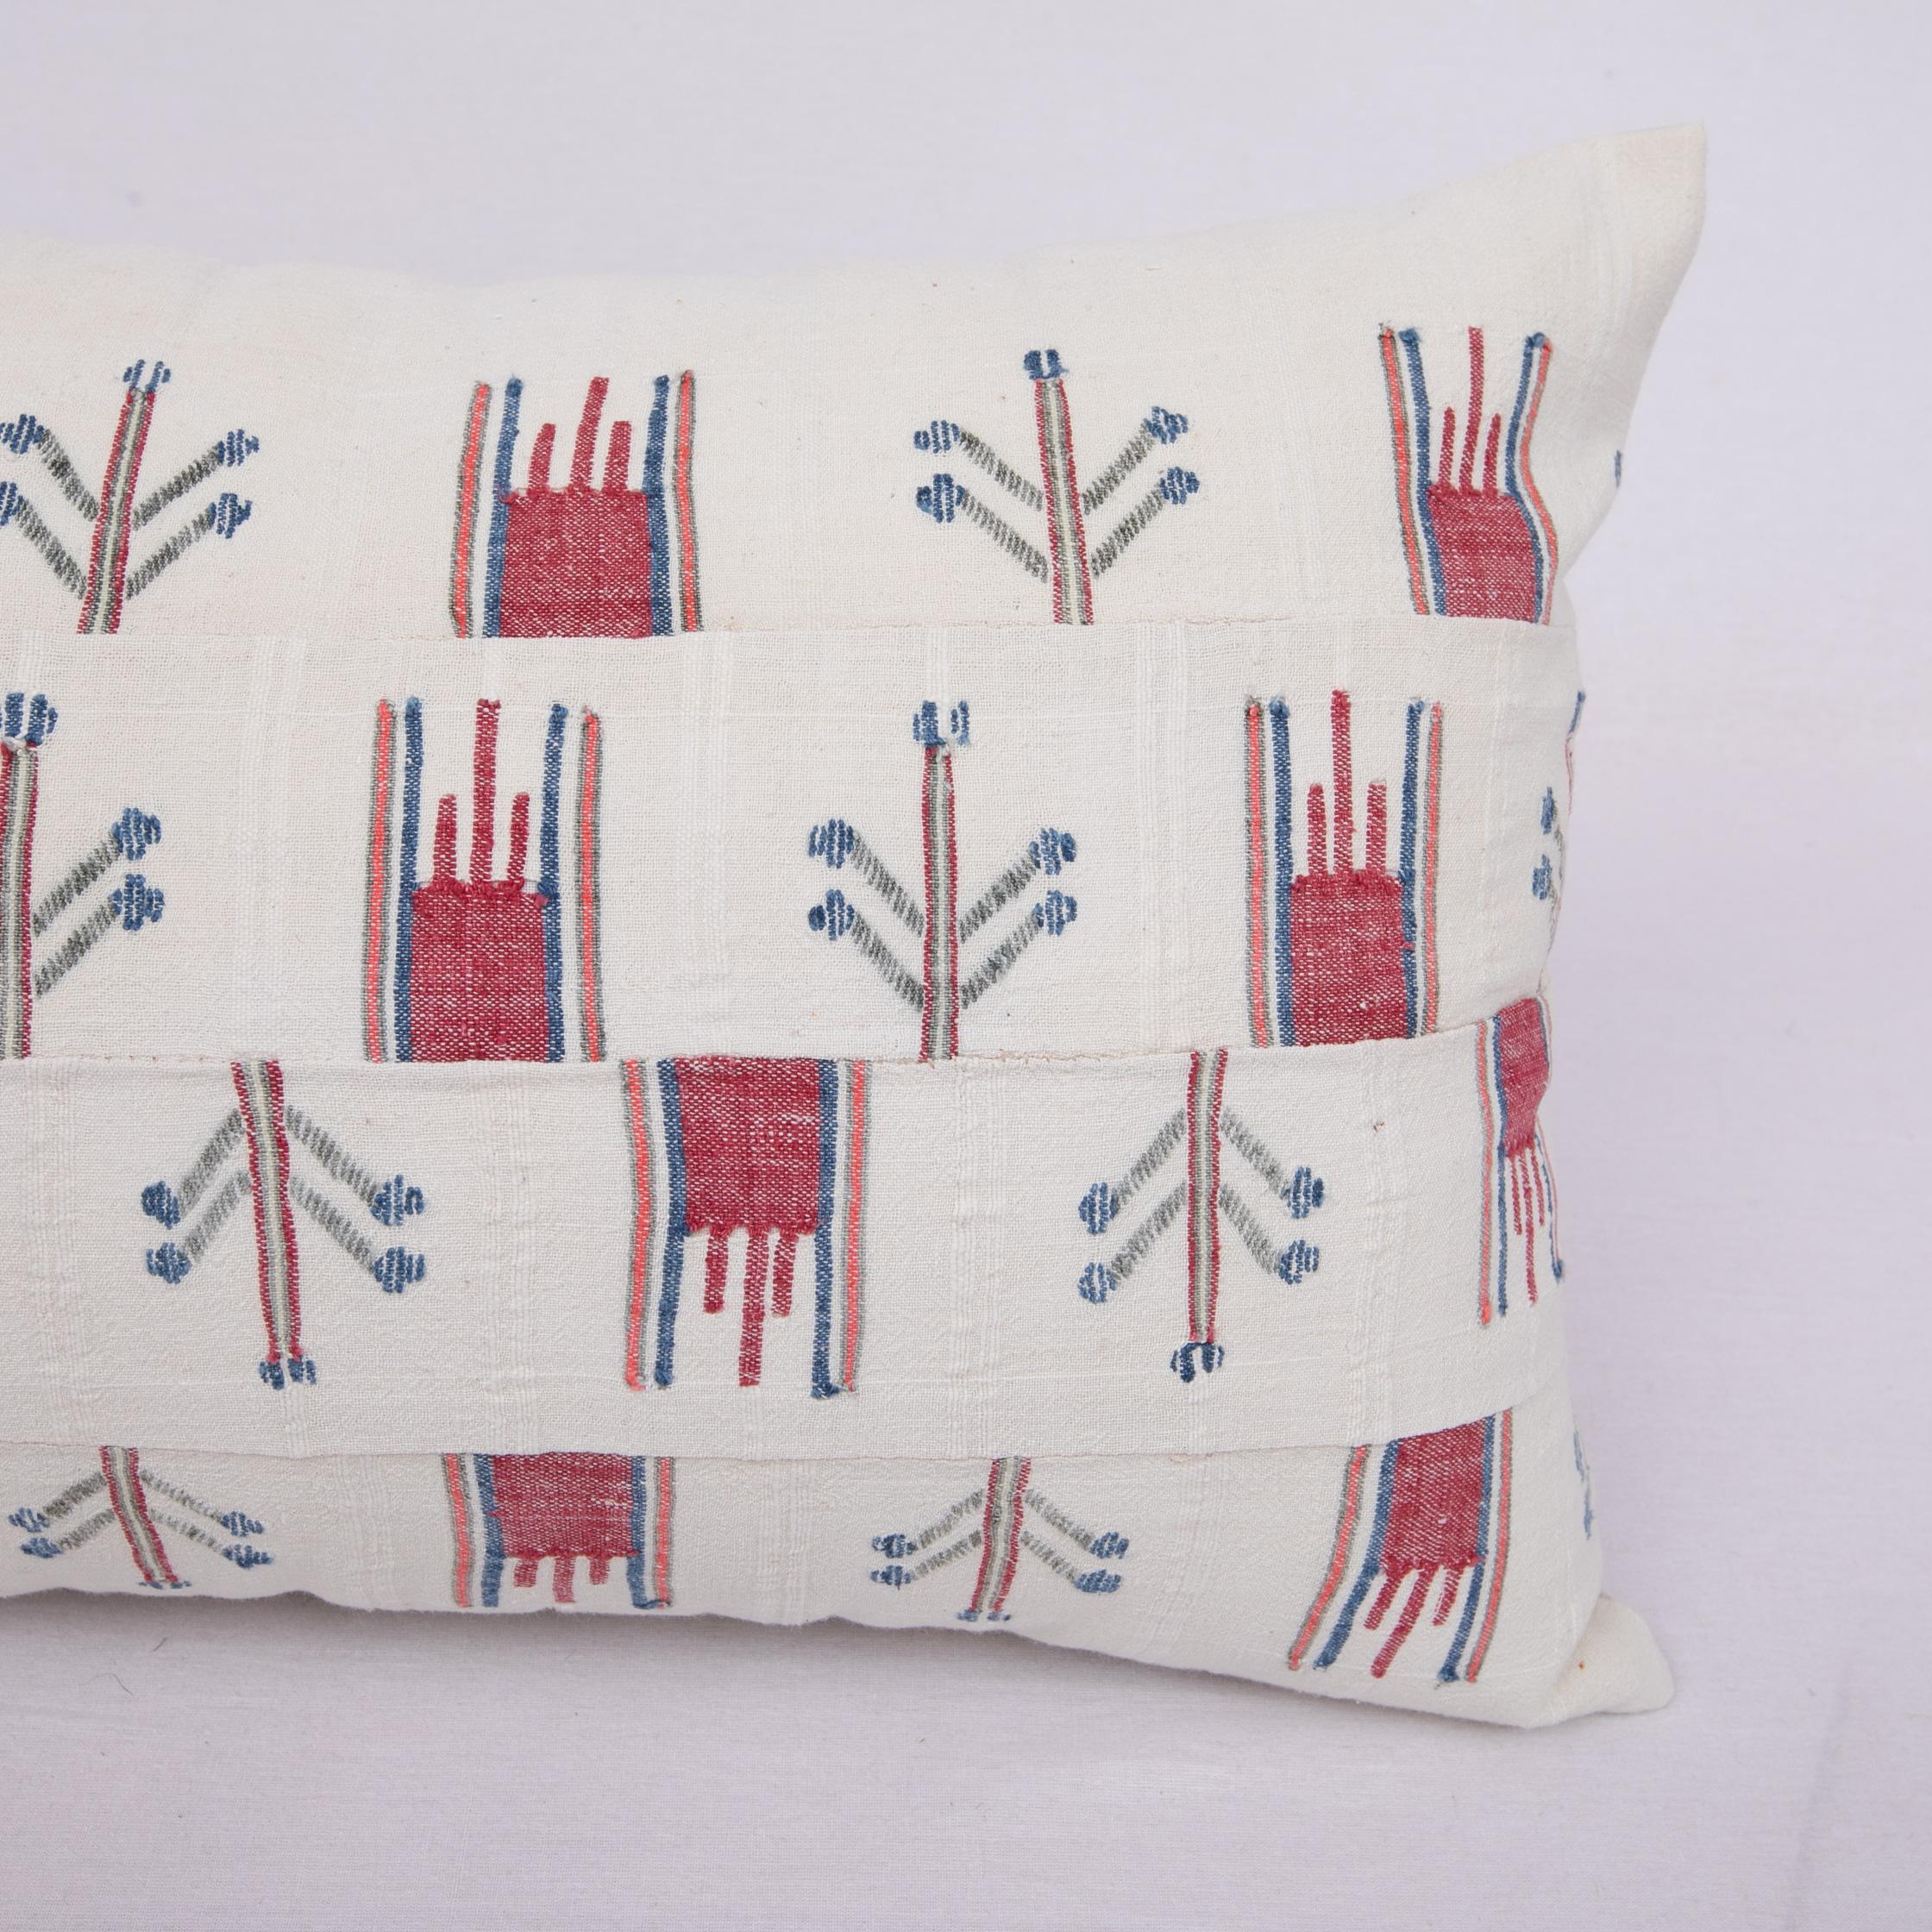 Hand-Woven Pillow Case Fashioned from a Vintage Bulgarian Textile, 1960s